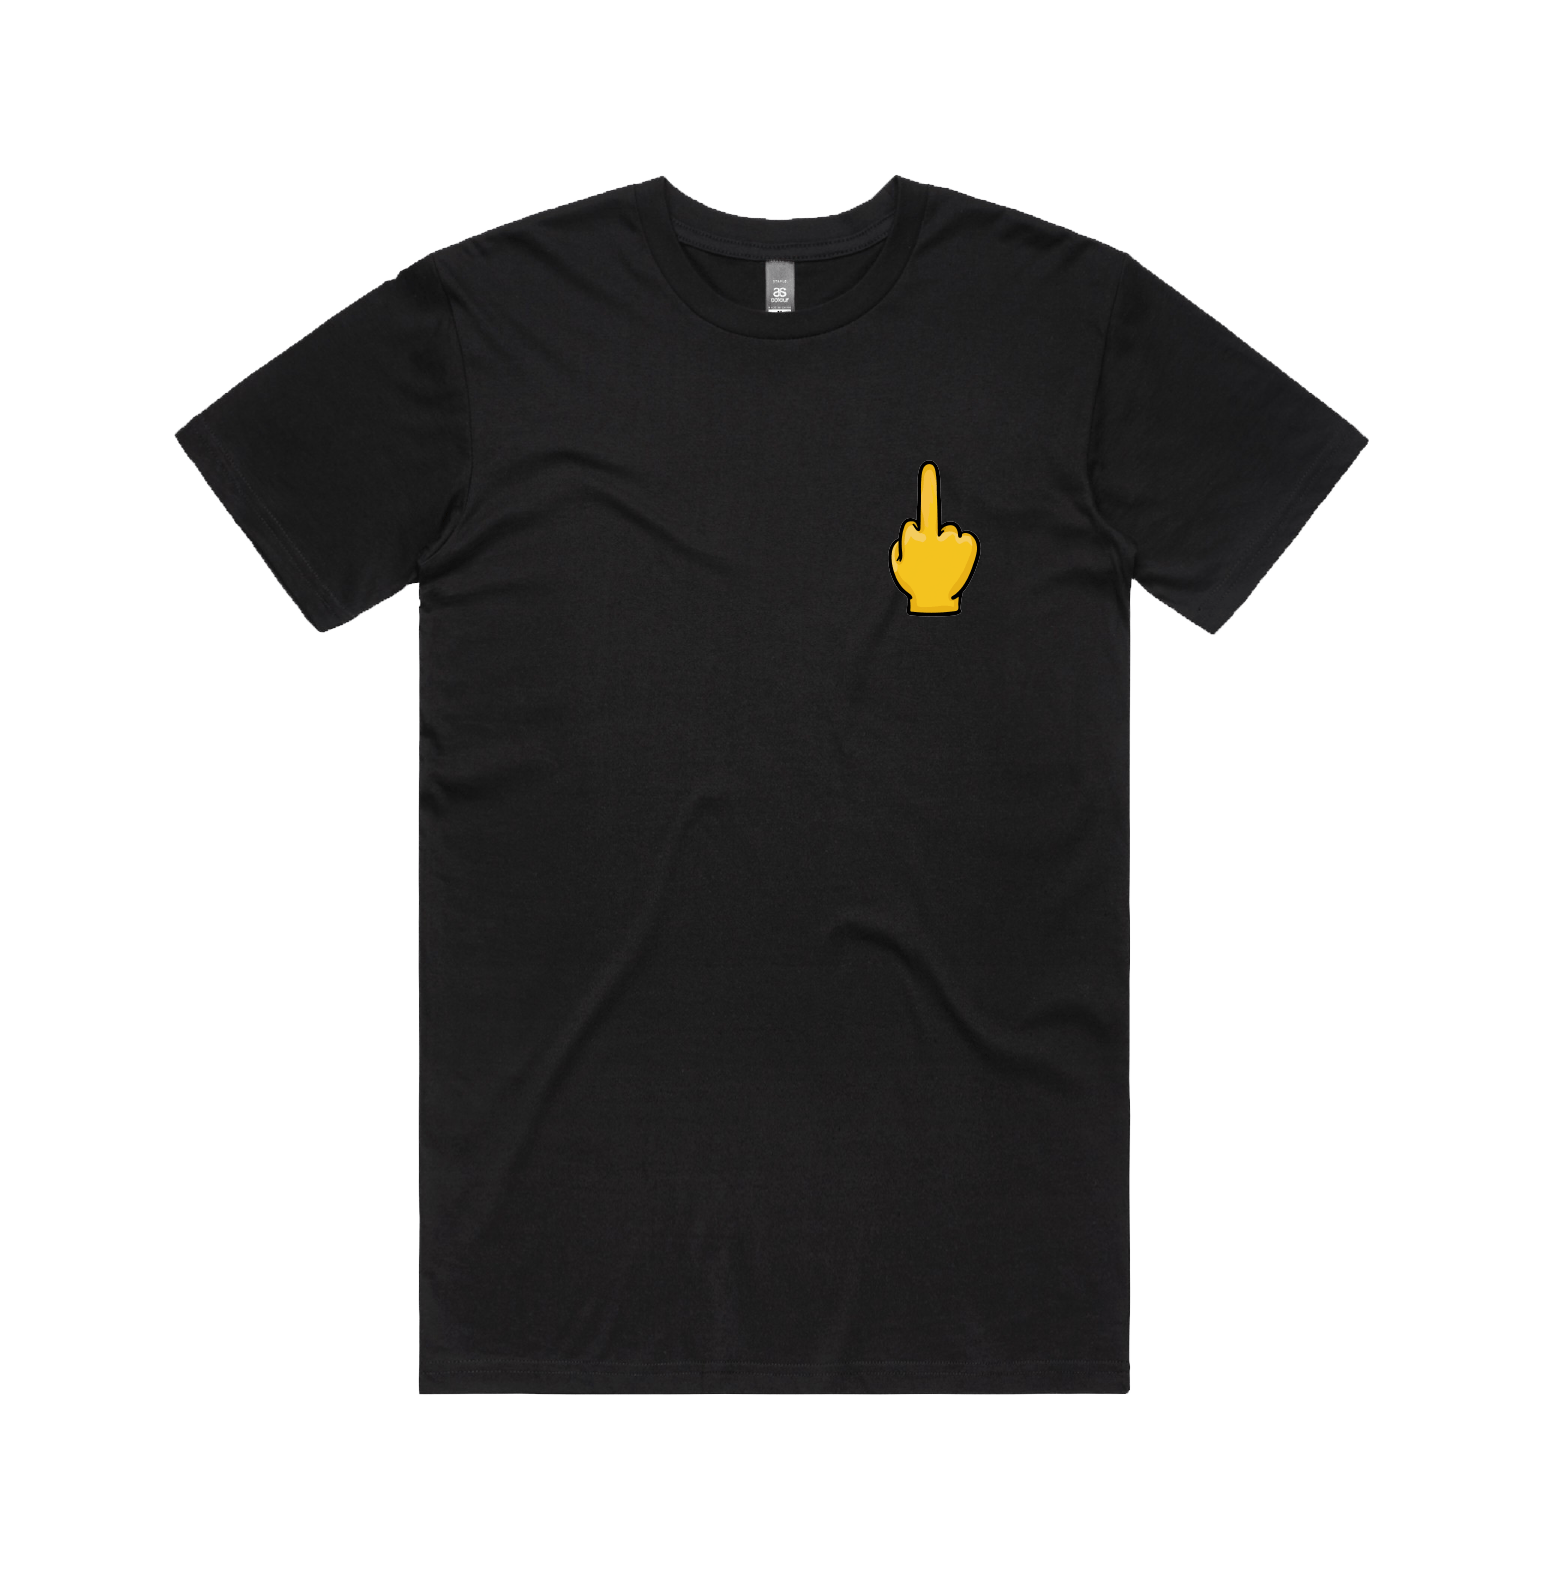 S / Black / Small Front Design Up Yours 🖕 - Men's T Shirt